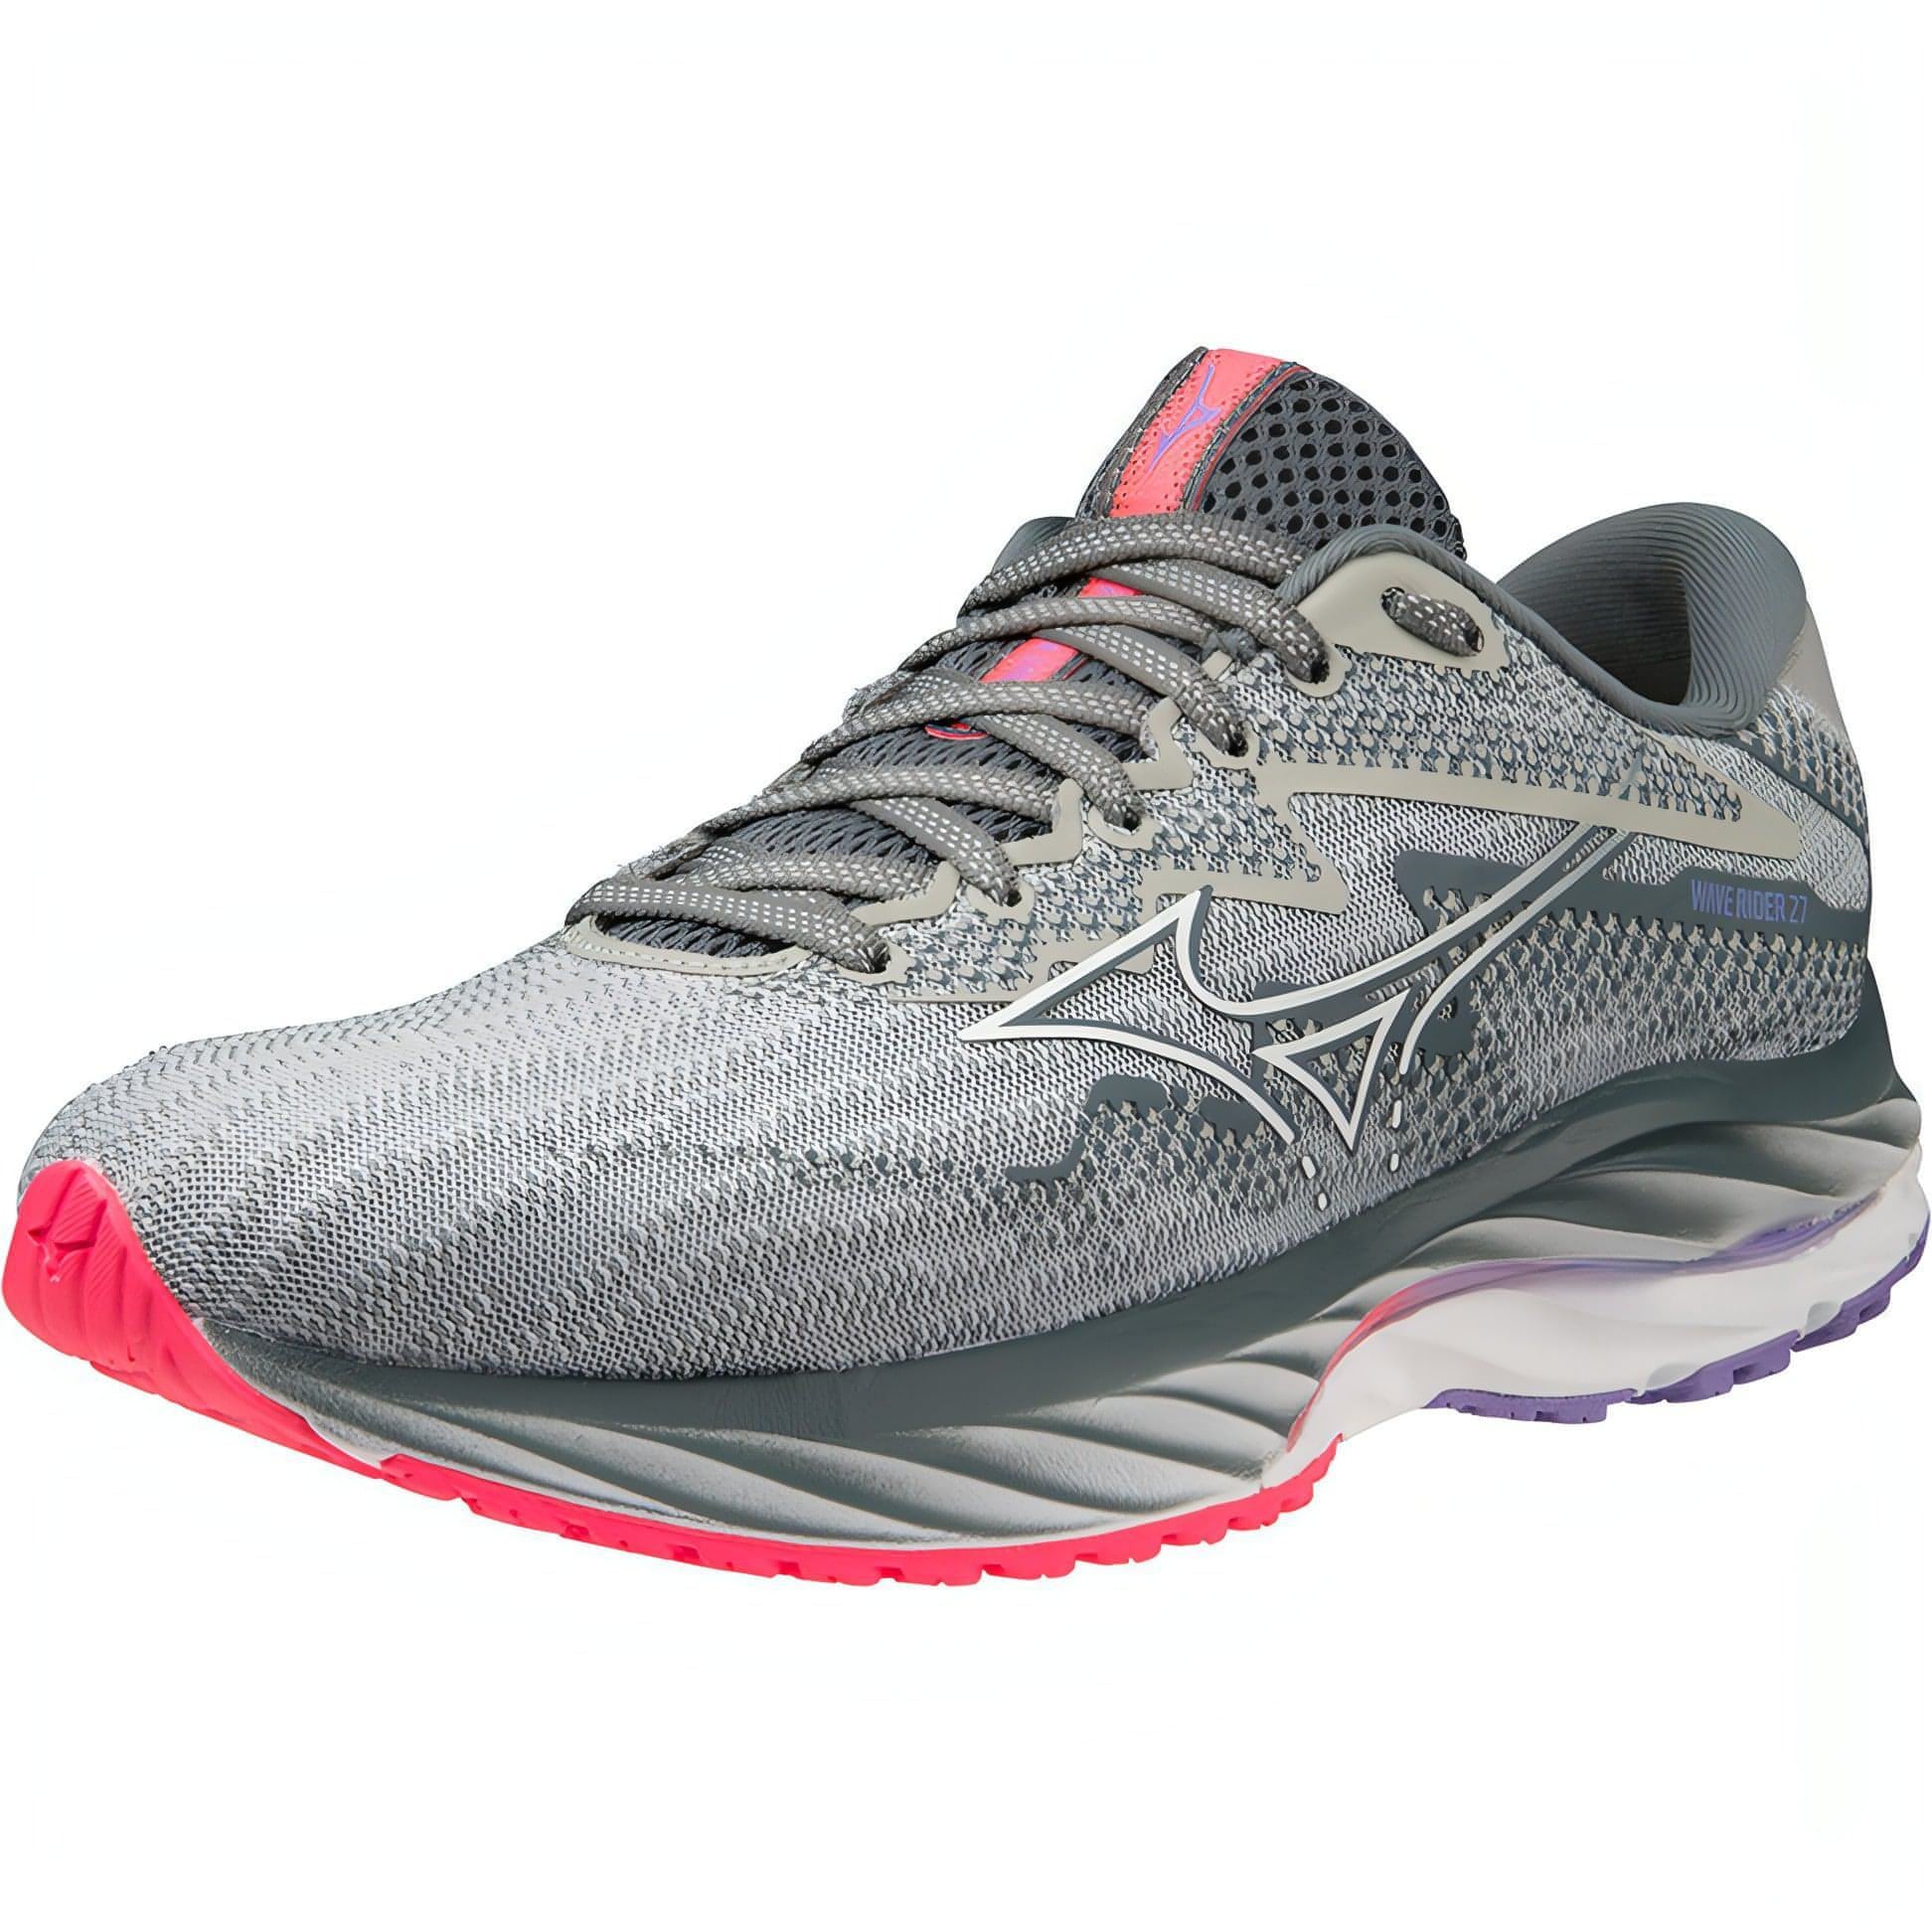 Mizuno Wave Rider J1Gd2303 Front - Front View